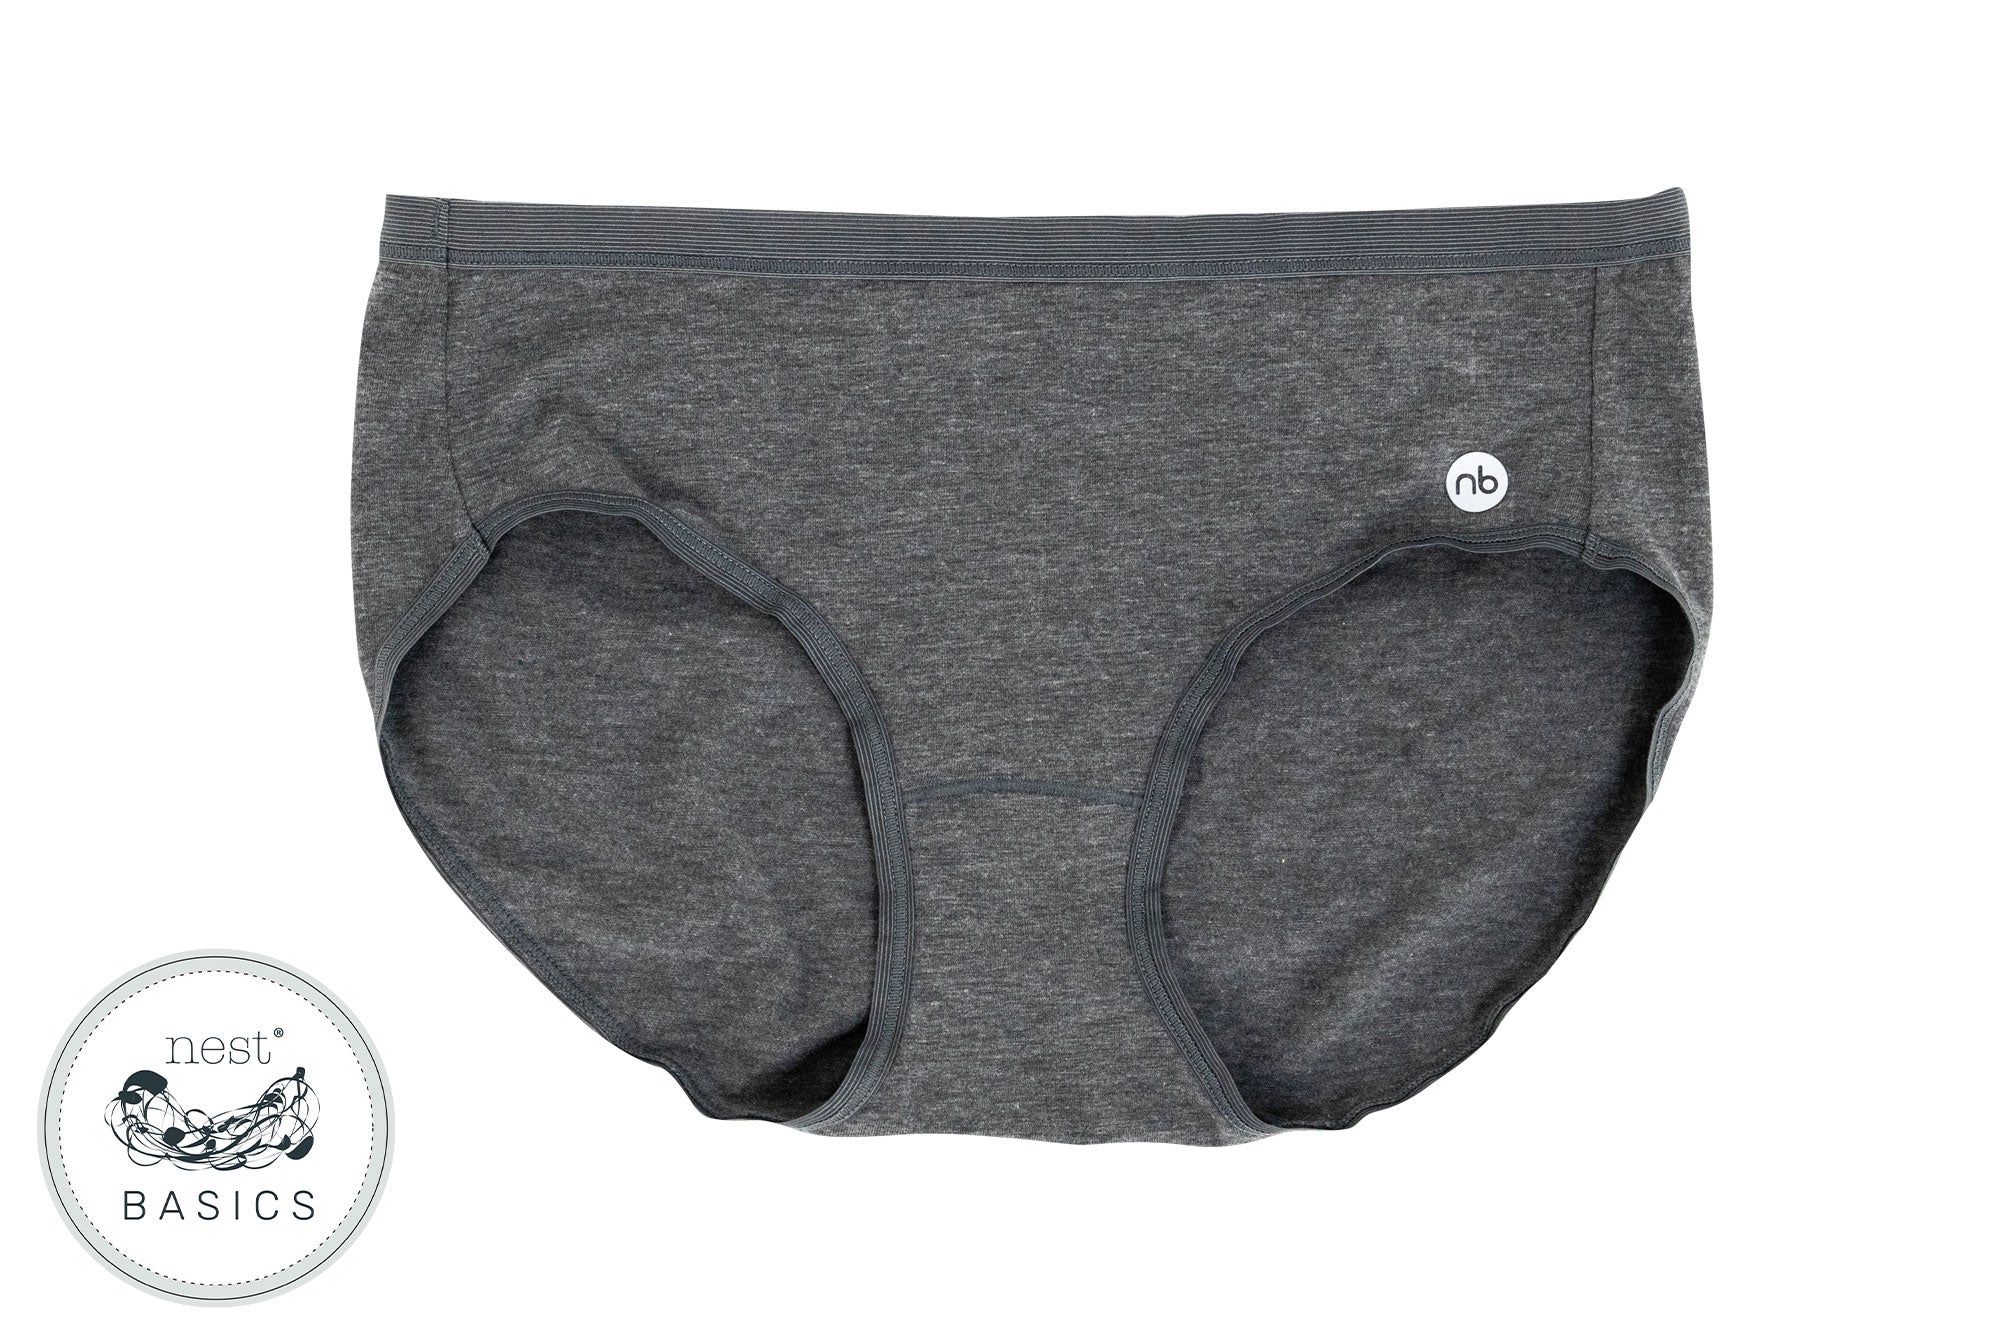 Women's Basics Bamboo Cotton Underwear (2 Pack) - Grey Dawn and Charcoal